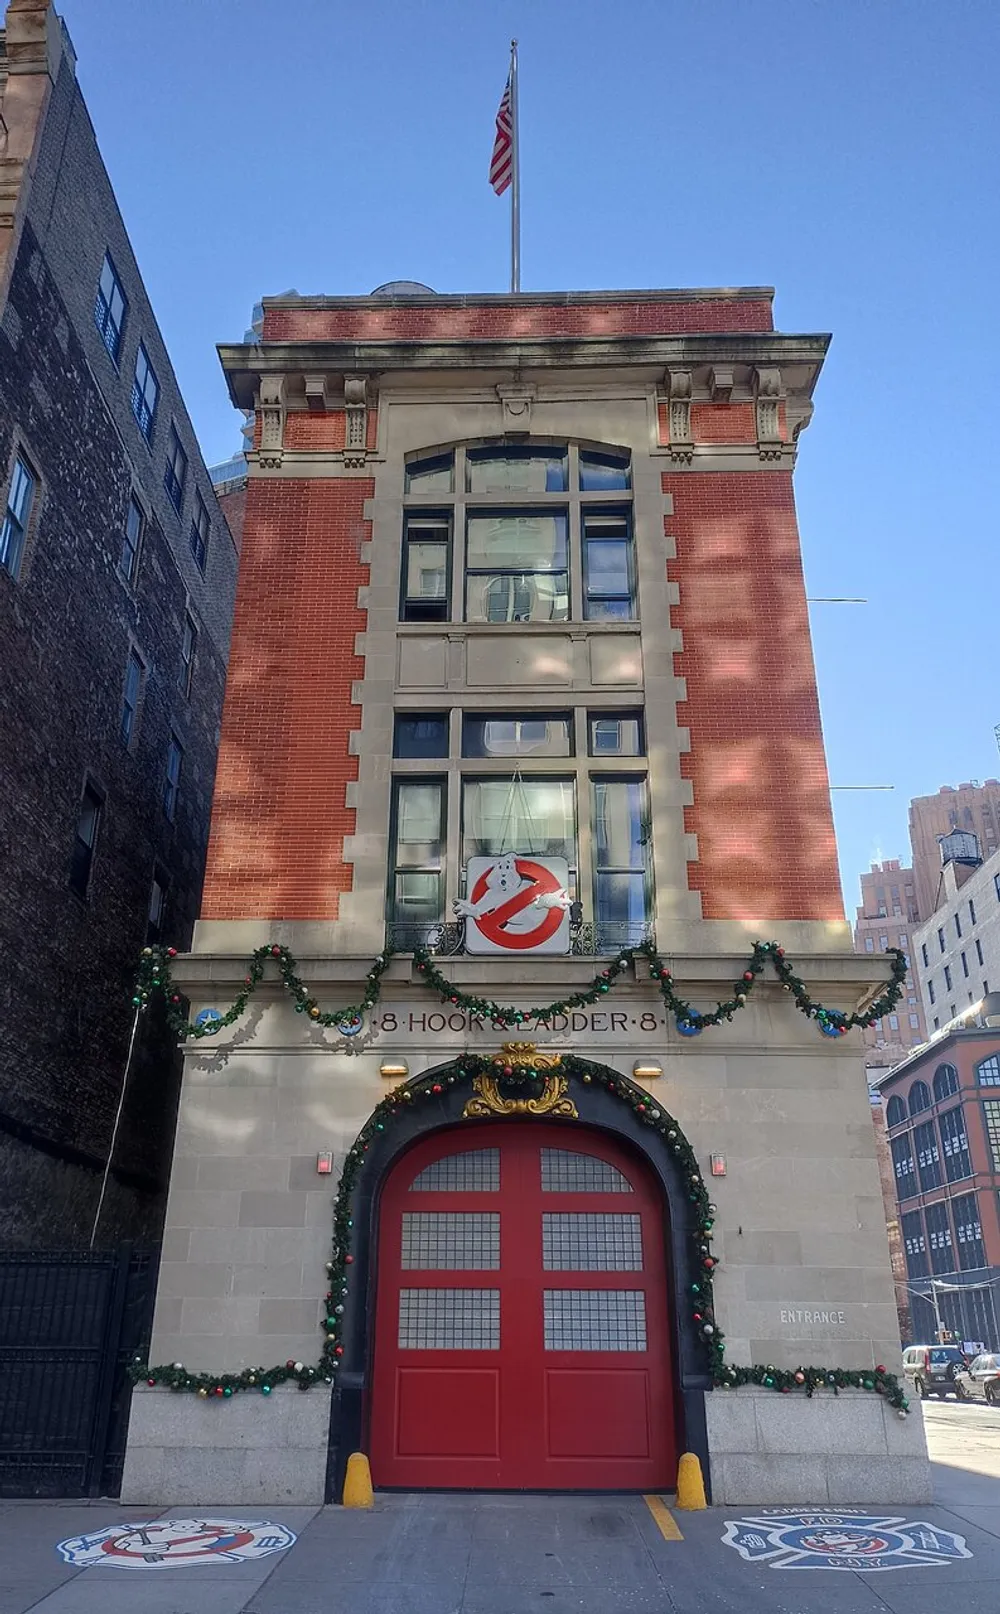 The image shows the exterior of a firehouse adorned with Ghostbusters logo and holiday decorations under a clear blue sky